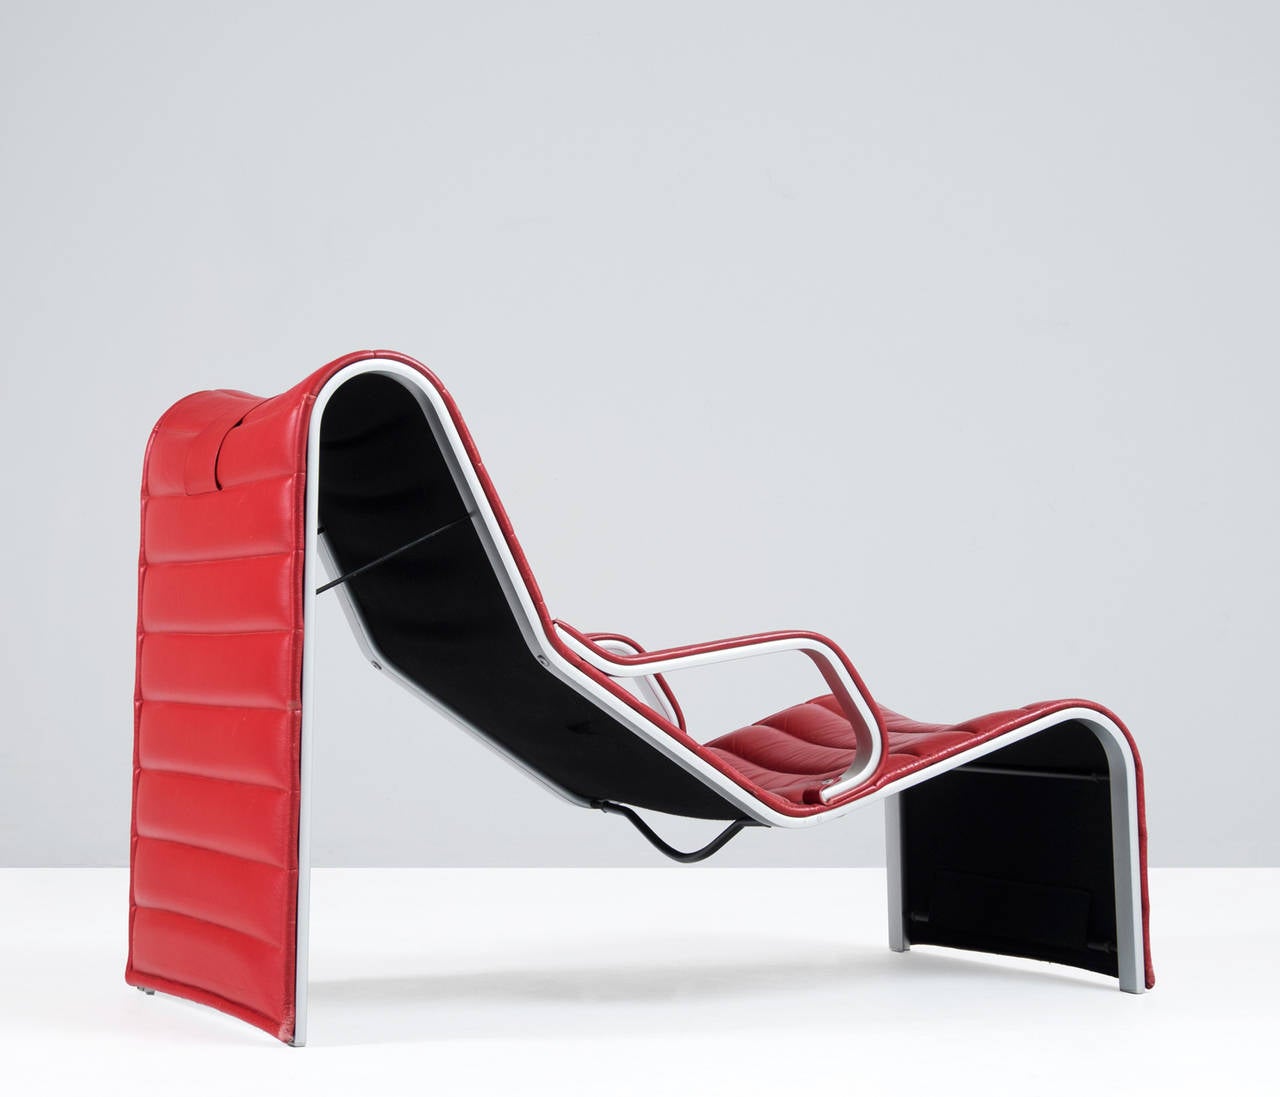 Very strong designed chaise longue. The bended aluminum frame is finished with high quality red leather upholstery.
High comfort when using it as daybed or lounge chair as well. 

Worldwide shipping possibilities: For competitive delivery quotes